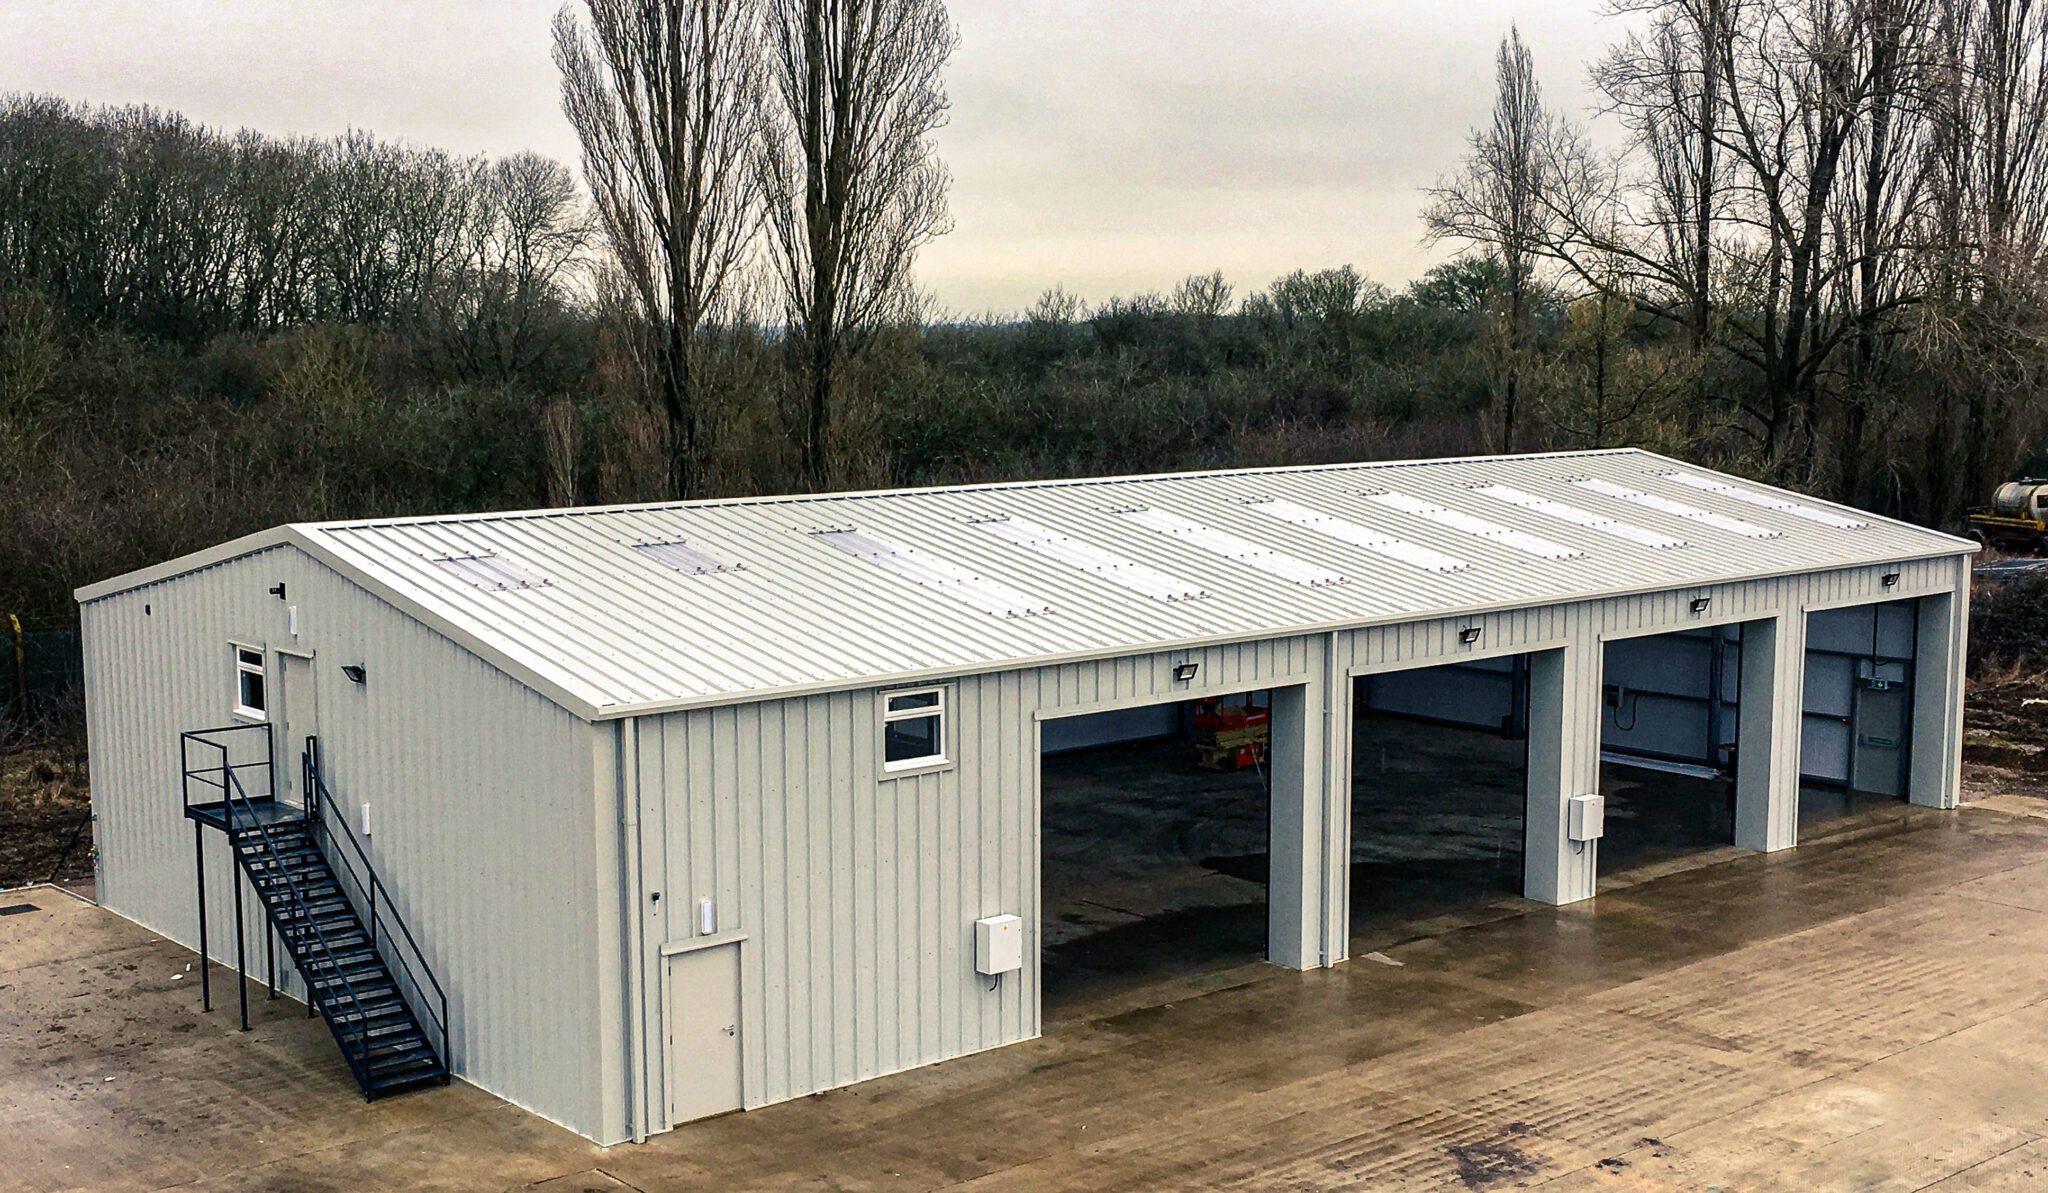 A bespoke steel framed building supplied to Portakabin near Aylesbury. The industrial warehouse was a cold rolled steel building with insulated cladding. The Steel structure was designed and installed by Springfield Steel Buildings.